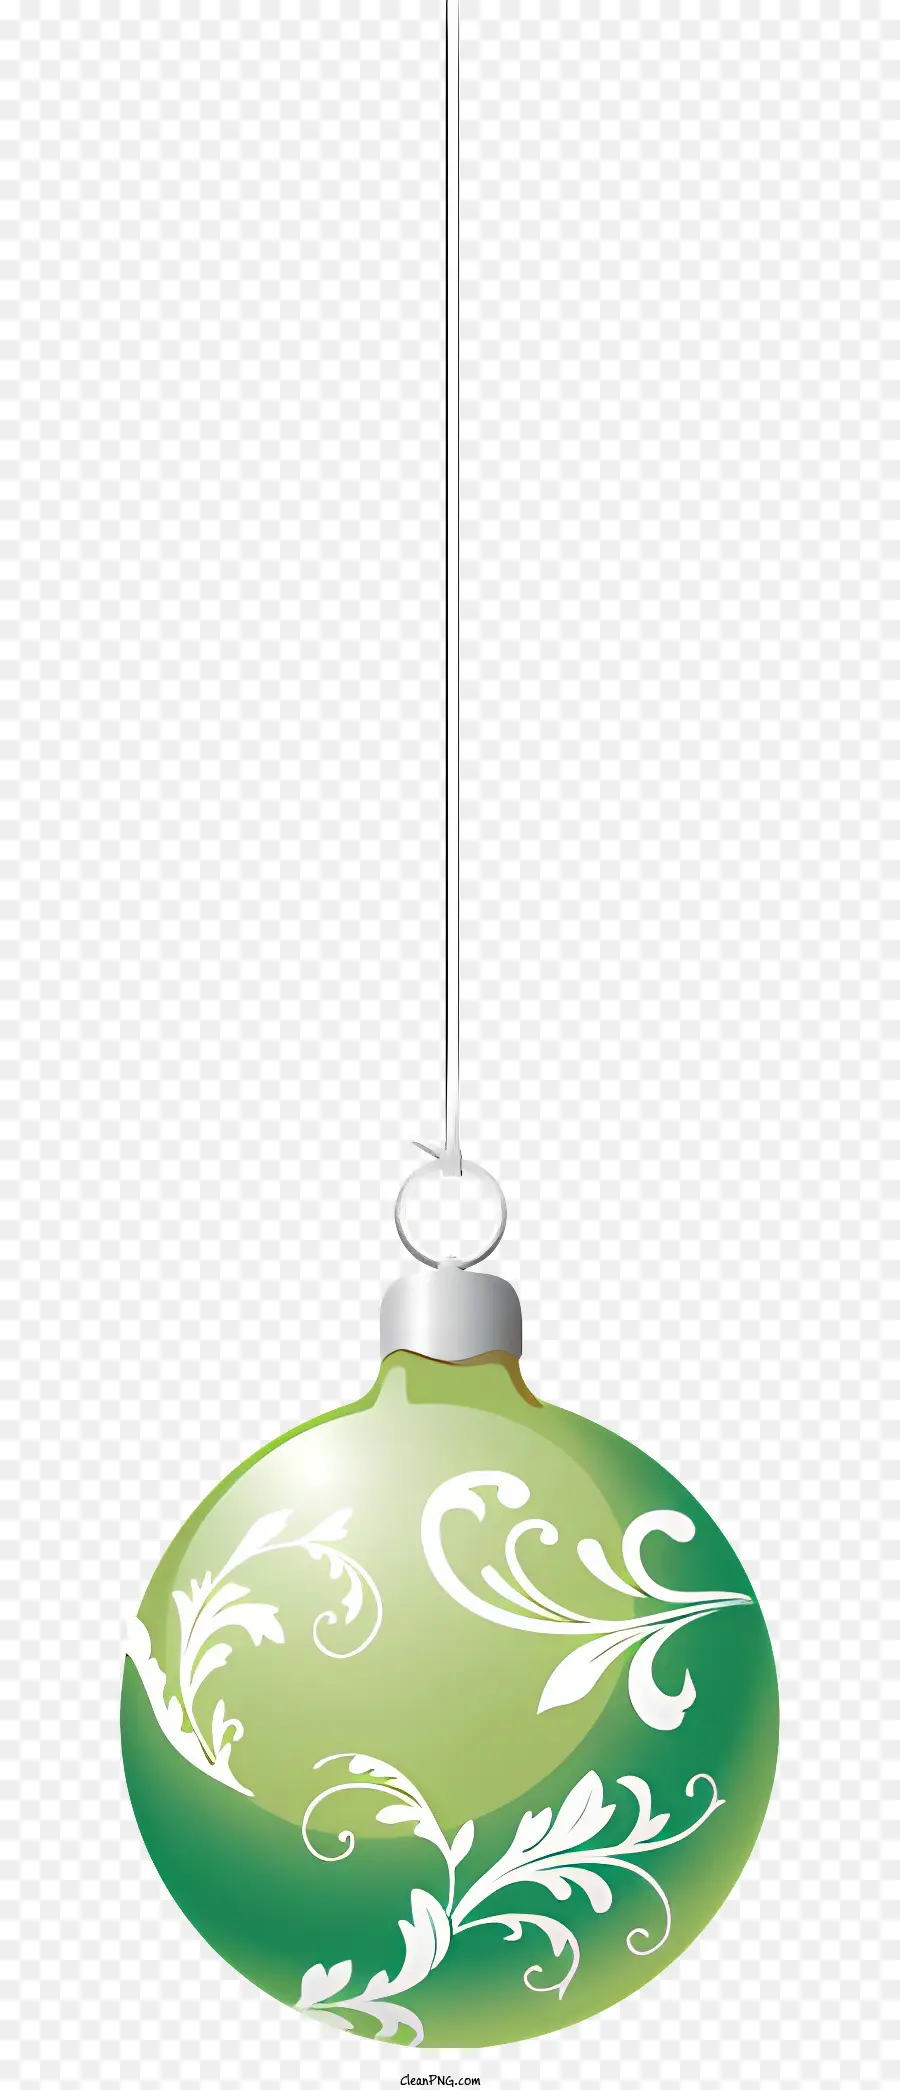 green ornament swirling pattern hanging ornament green decoration round base